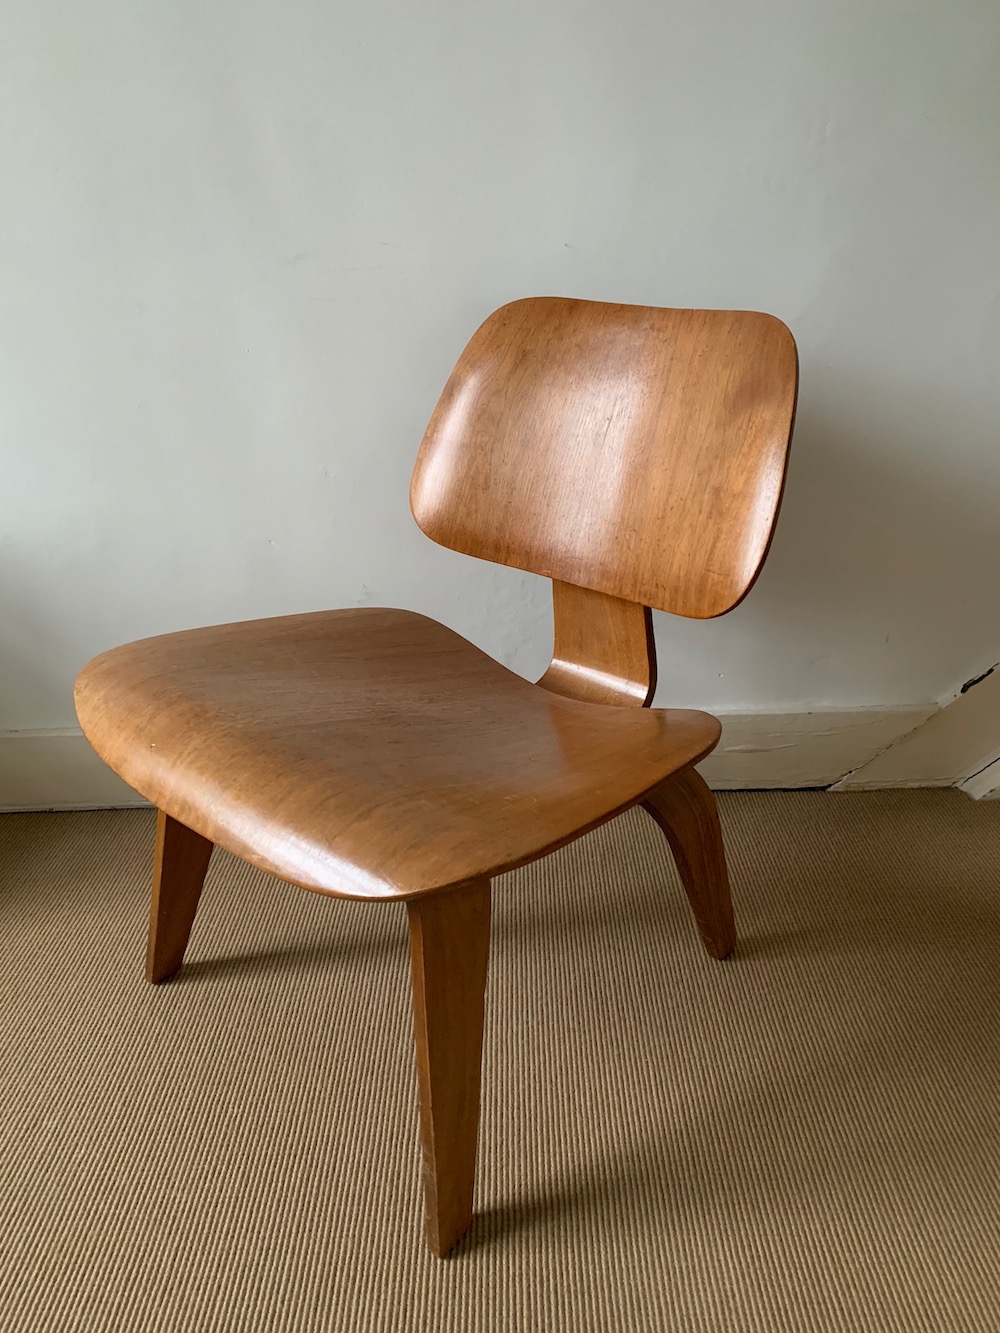 LCW, lounge chair wood, Eames, Eames chair, Charles and Ray Eames, designaddict, designicon, iconic design, collectible, American design, midmod, midcenturymodern, midcentury furniture, vintage lounge chair, shockmounts, vintage chairs, wooden chairs, handcrafted chairs, Herman Miller, authentic design, original design